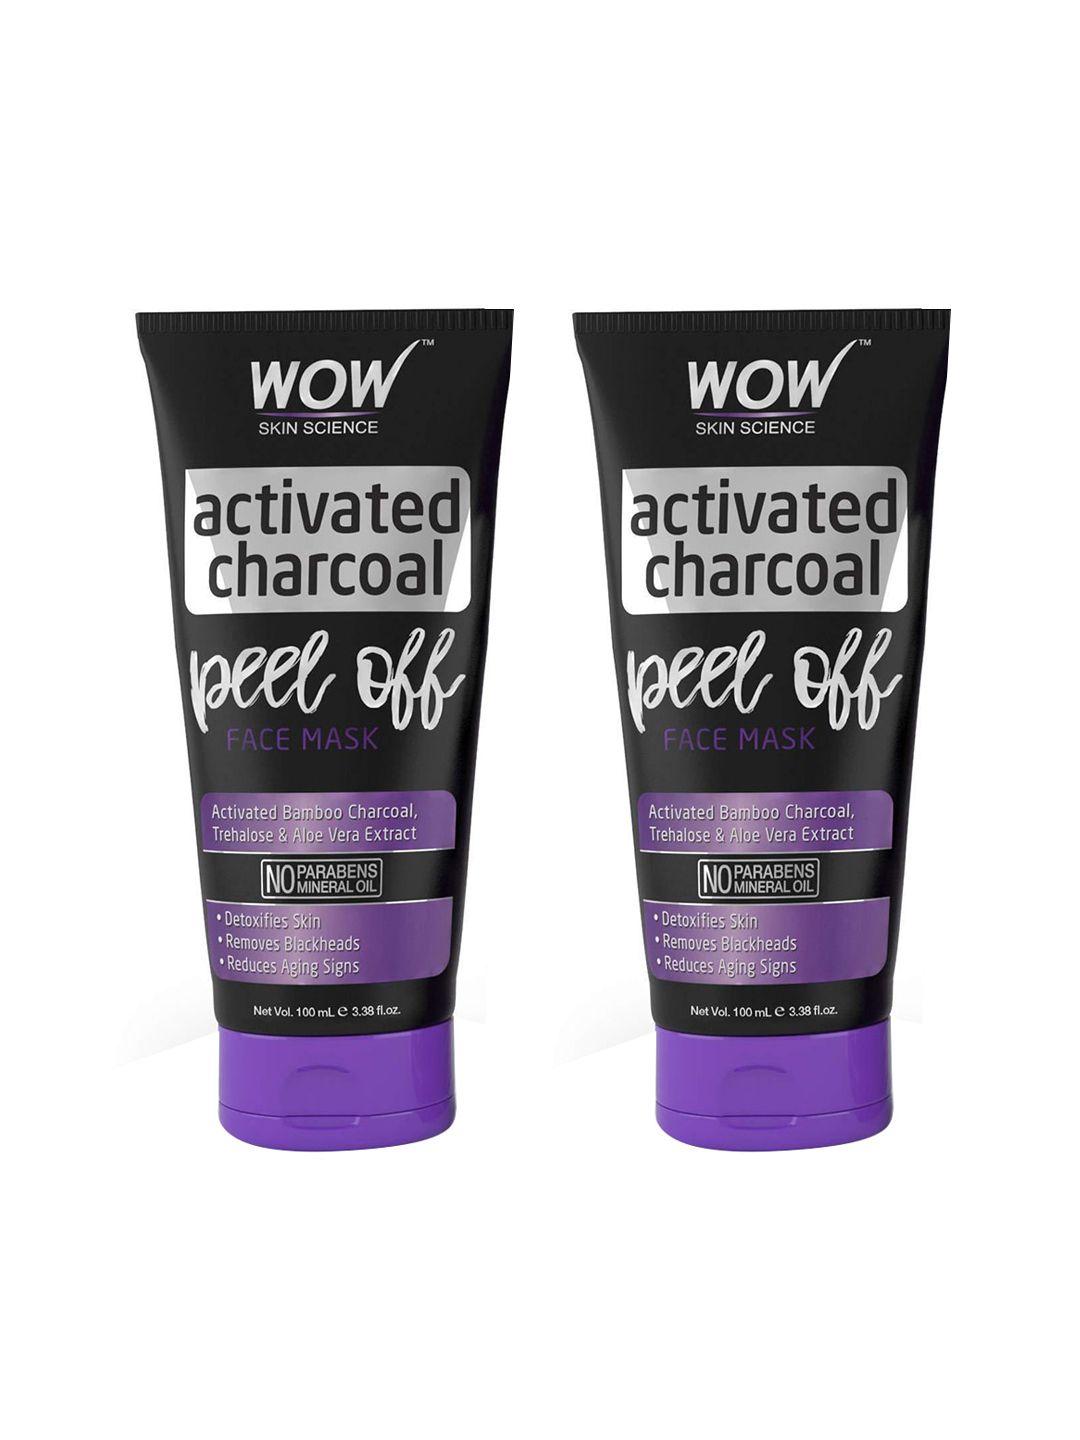 wow skin science set of 2 activated charcoal peel-off face mask - 100 ml each